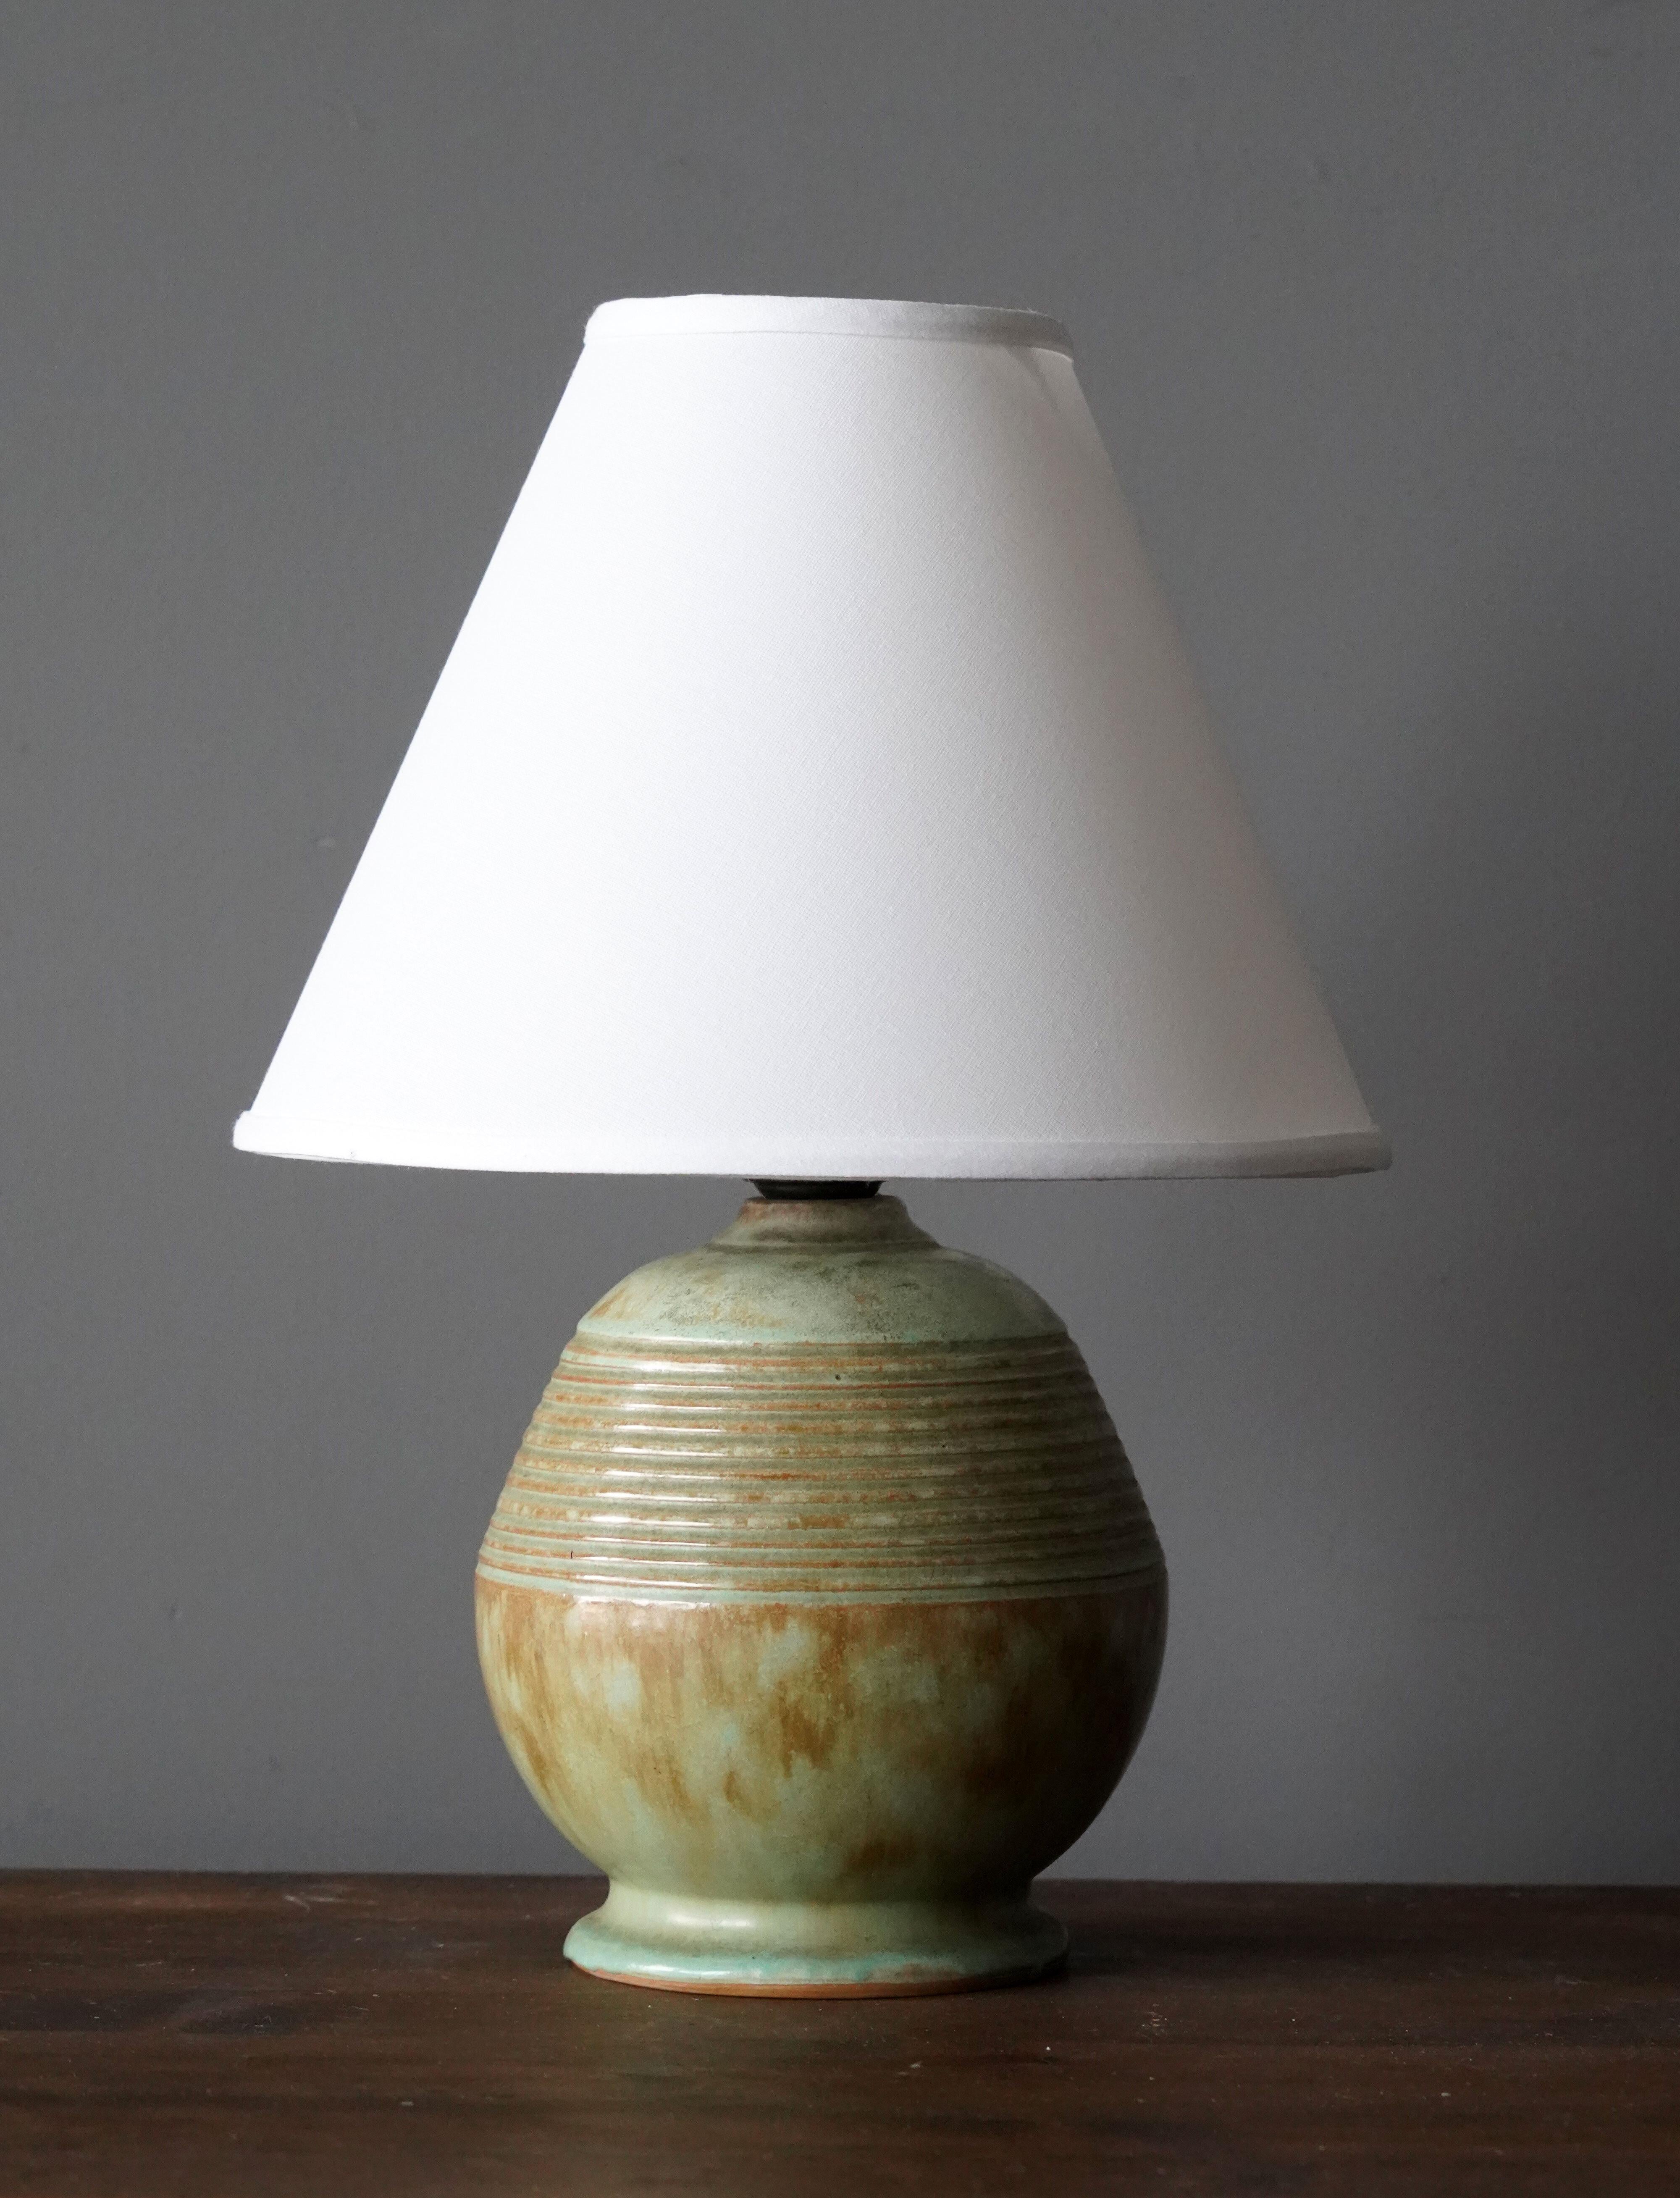 A table lamp, production attributed to iconic Swedish firm Ekeby. In glazed stoneware.

Sold without lampshade, stated dimensions excluding lampshade.

Other designers of the period include Axel Salto, Carl Harry Stålhane, Berndt Friberg, Lisa